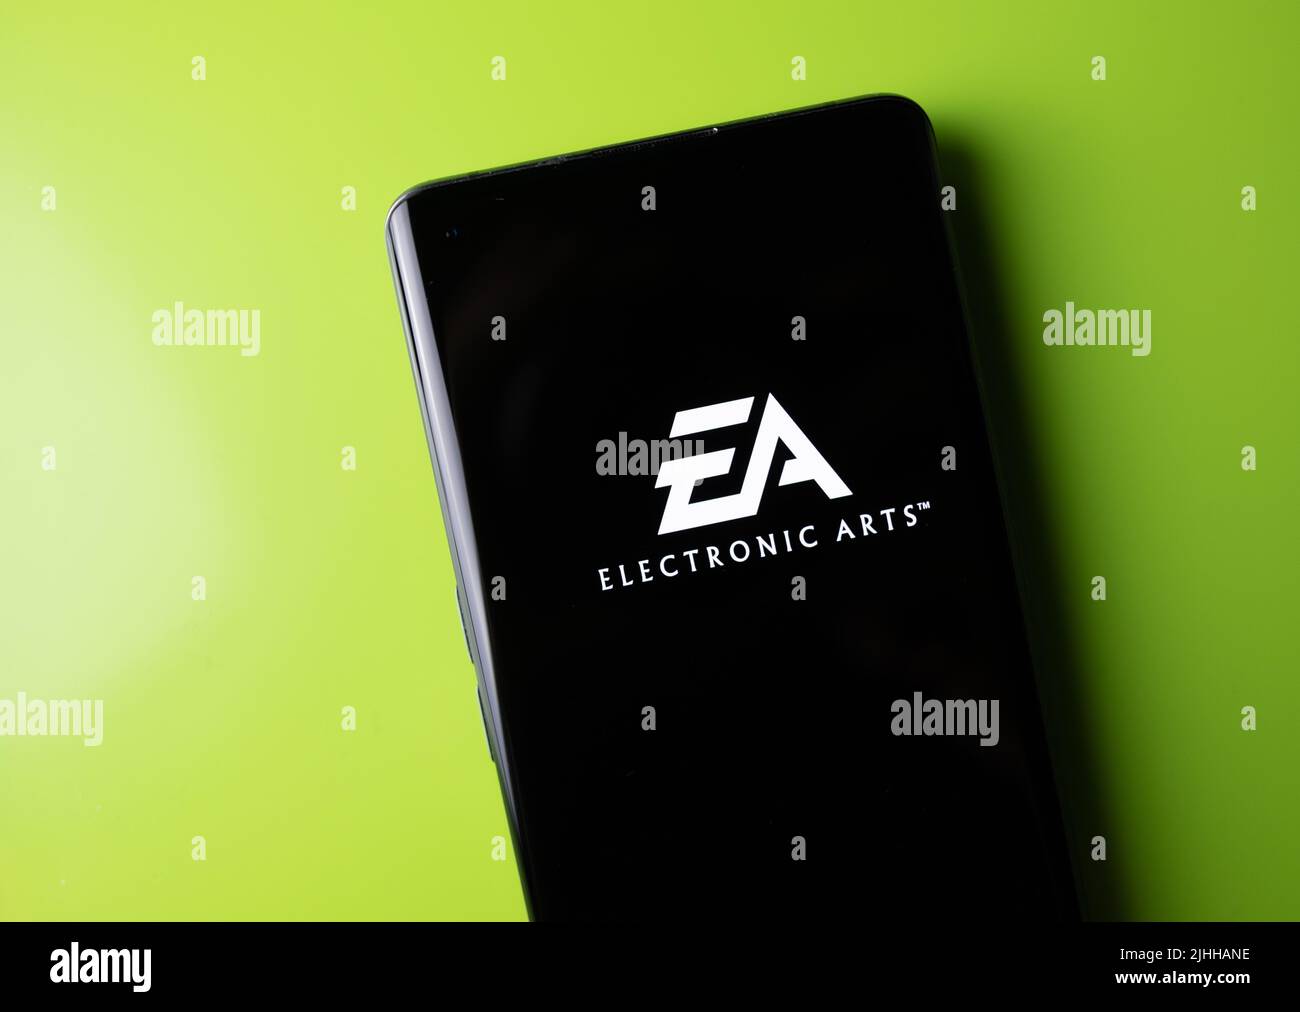 EA electronic arts logo seen on smartphone with copy space Stock Photo